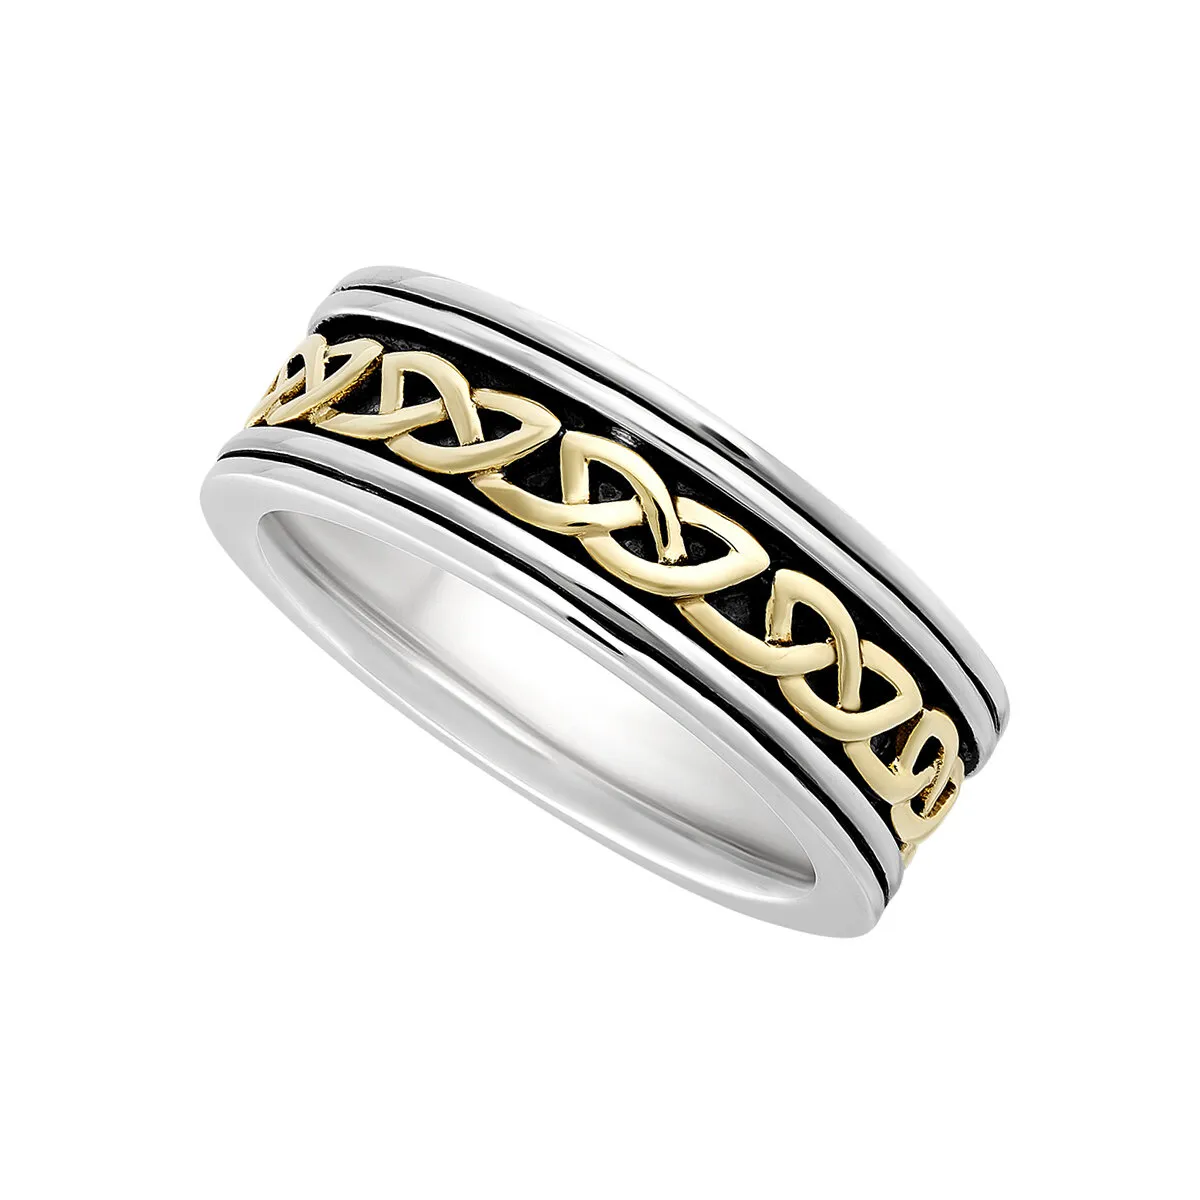 Mens 10k Gold & Silver Oxidized Celtic Knot Ring